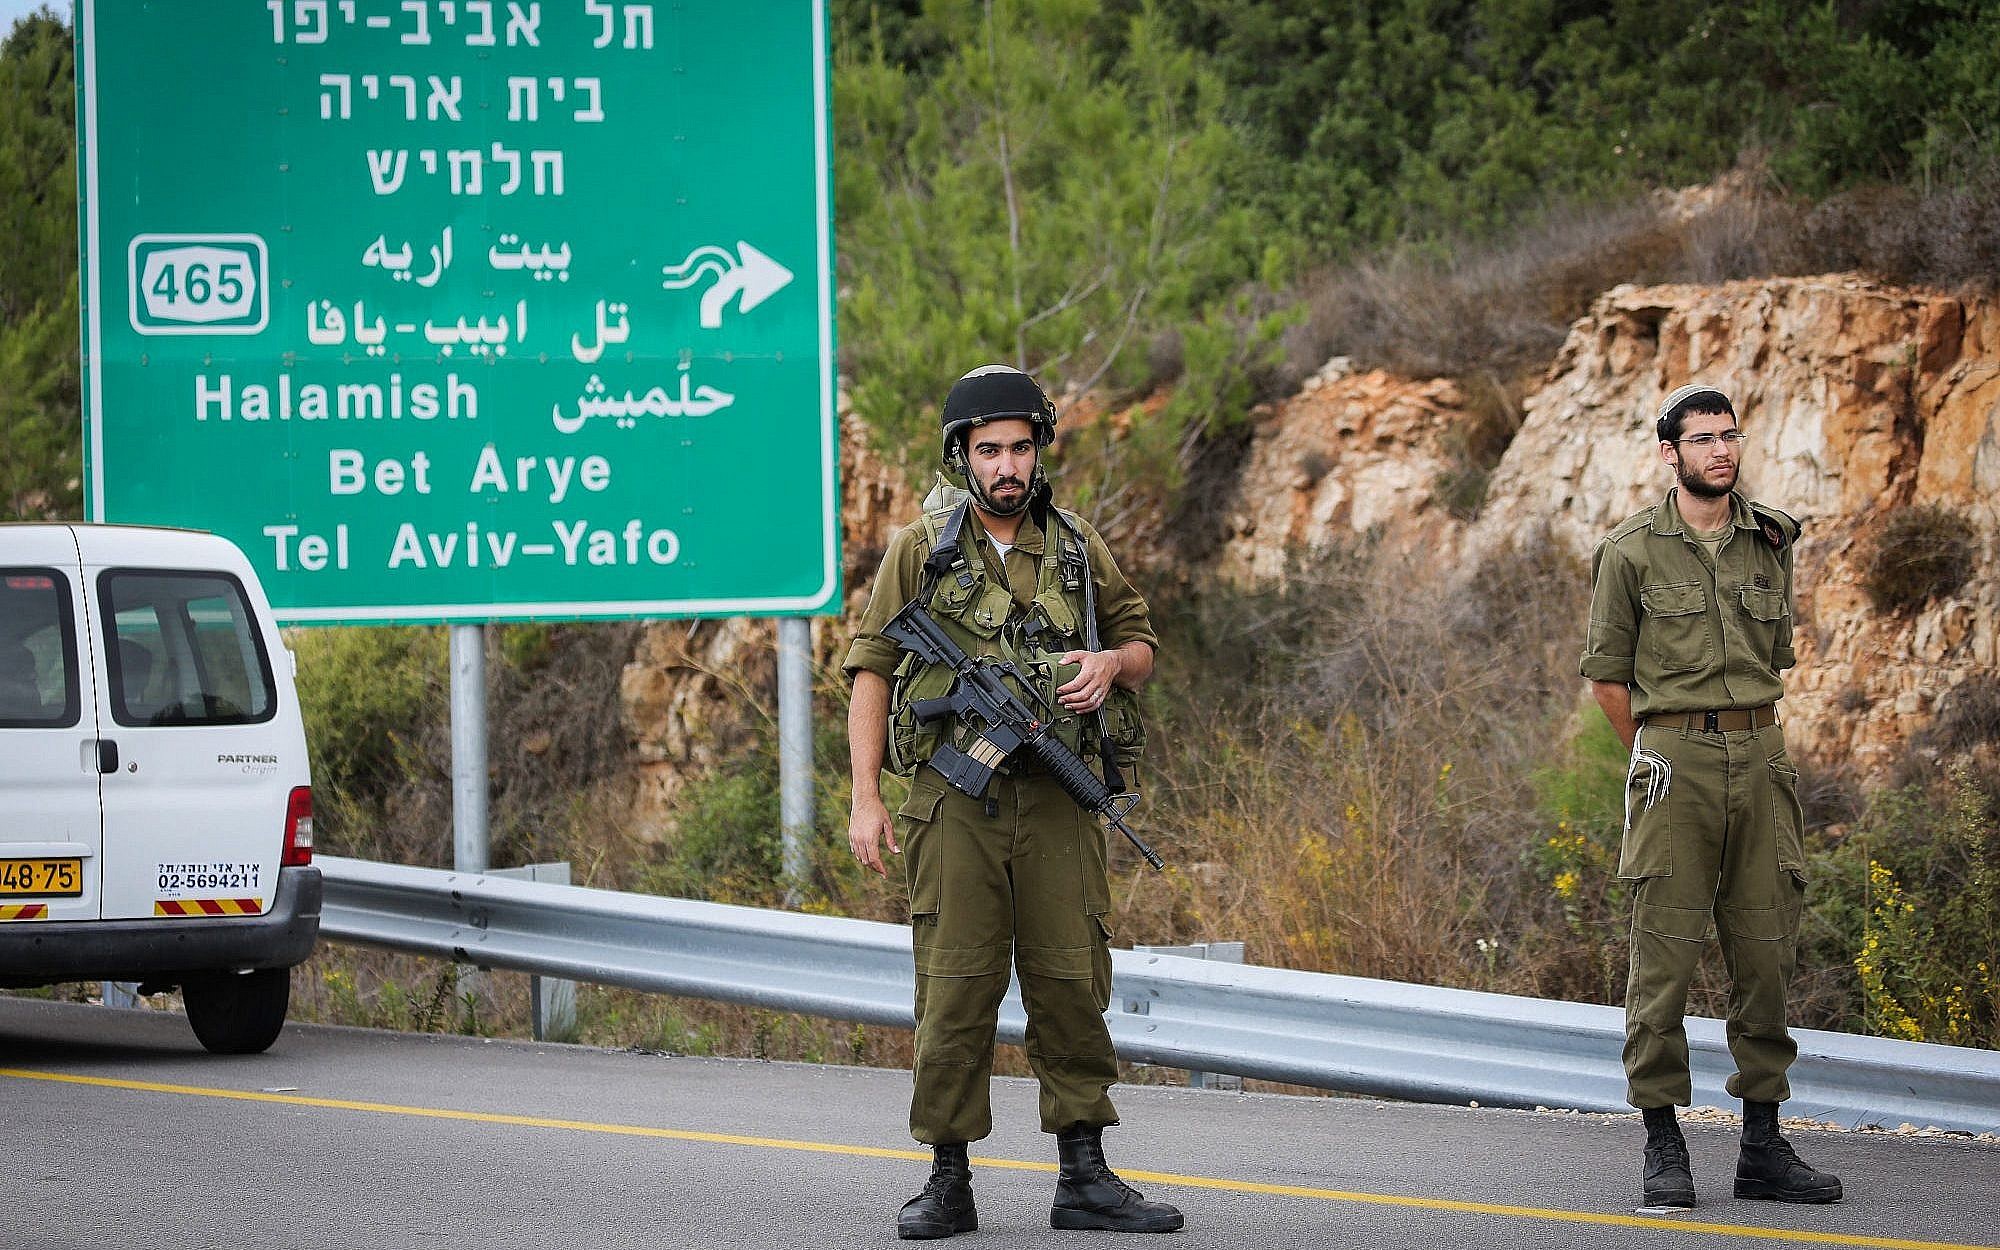 Security forces are seen near the West Bank settlement of Halamish, where IDF soldiers shot dead a Palestinian driver who they said accelerated towards them, on October 31, 2017. (Flash90)